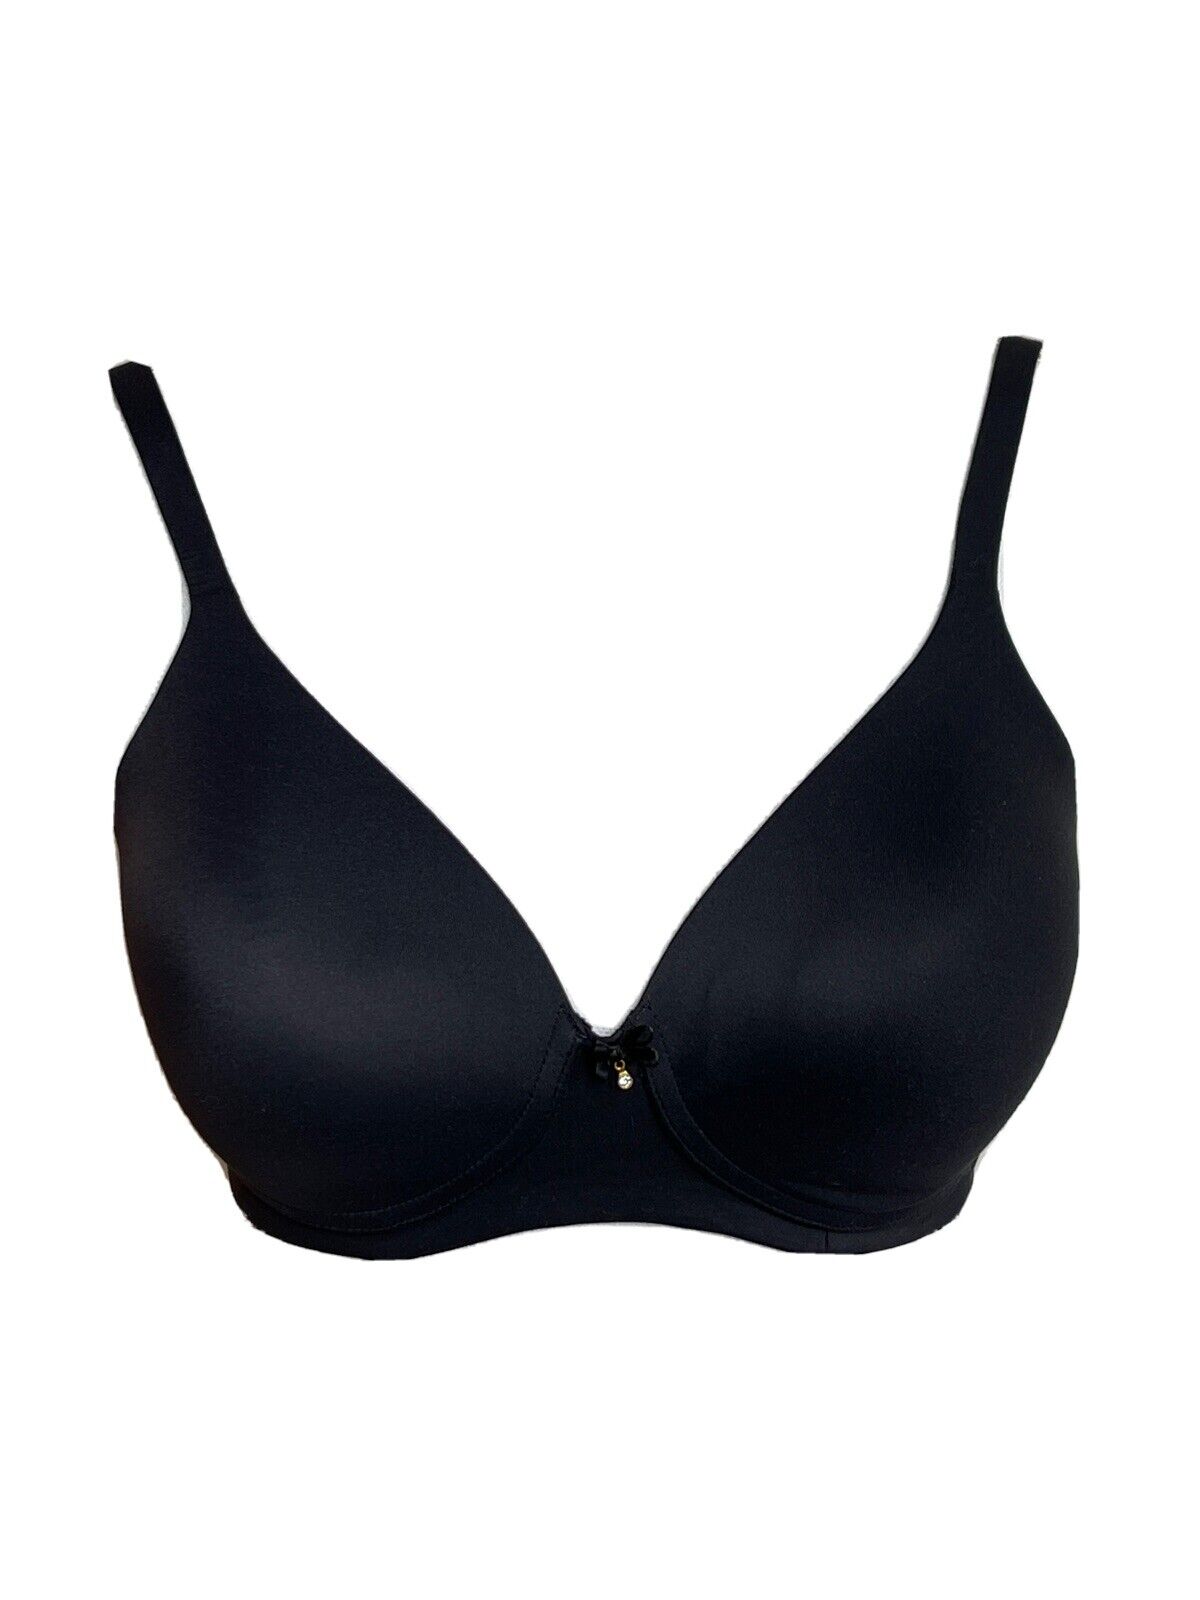 Soma Bra 36B Black Embraceable Wirefree Full Coverage Lightly Padded  RN79984 - AbuMaizar Dental Roots Clinic